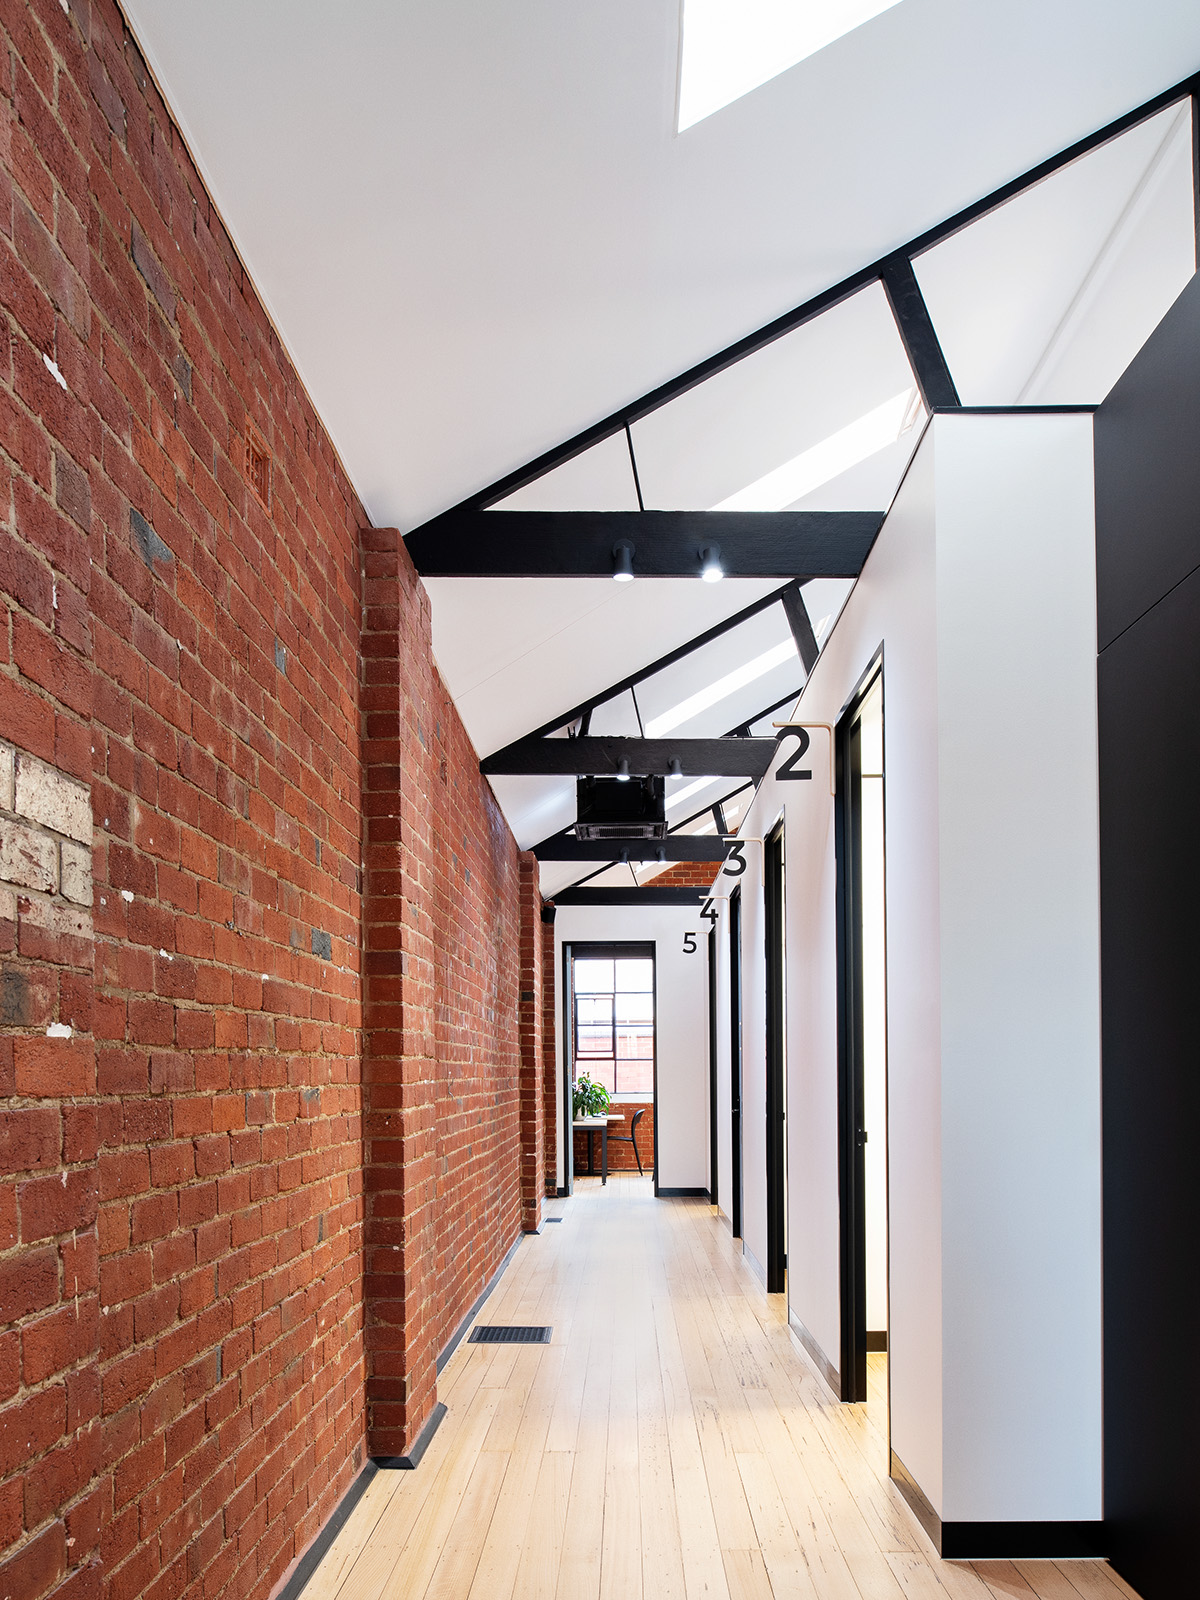 Featured ceilings | warehouse conversion | Eagleheart